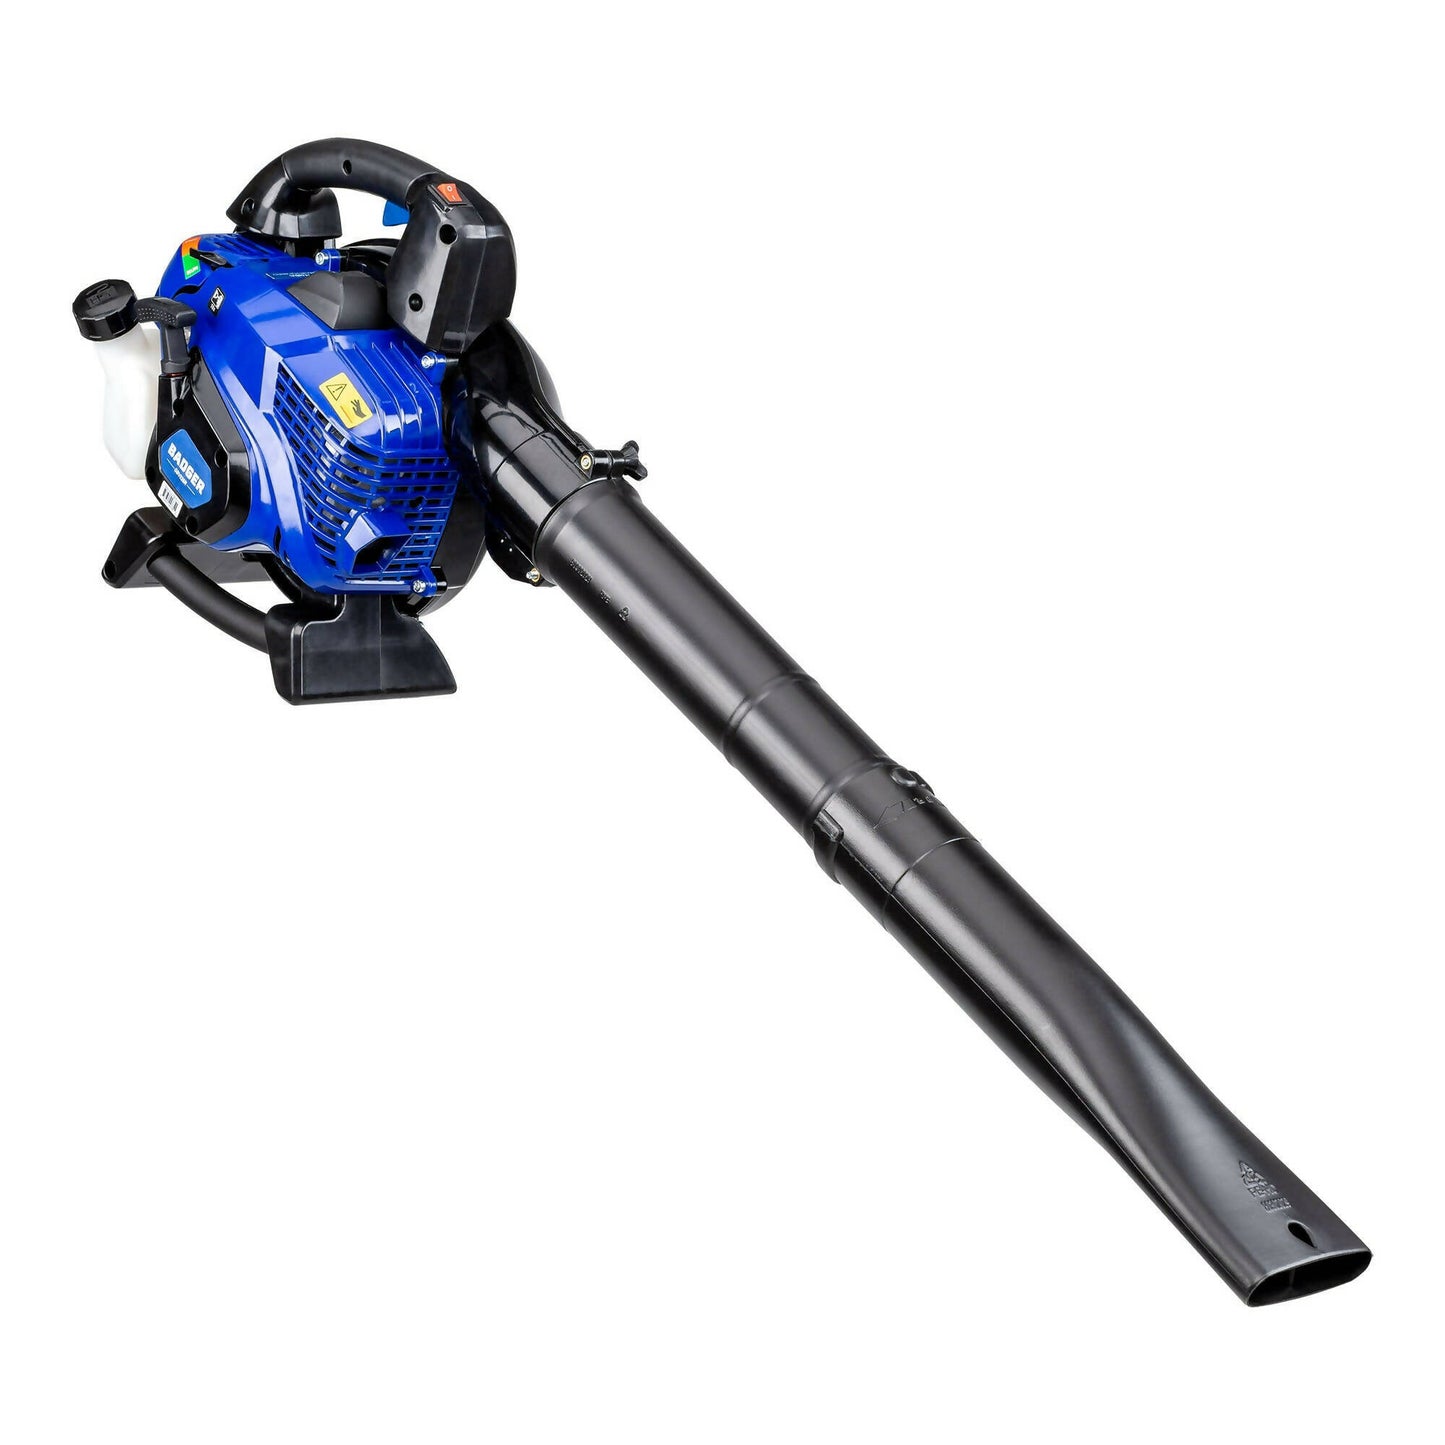 Wild Badger Power Gas 26cc Hand Held Blower and Vacuum Kit Combo